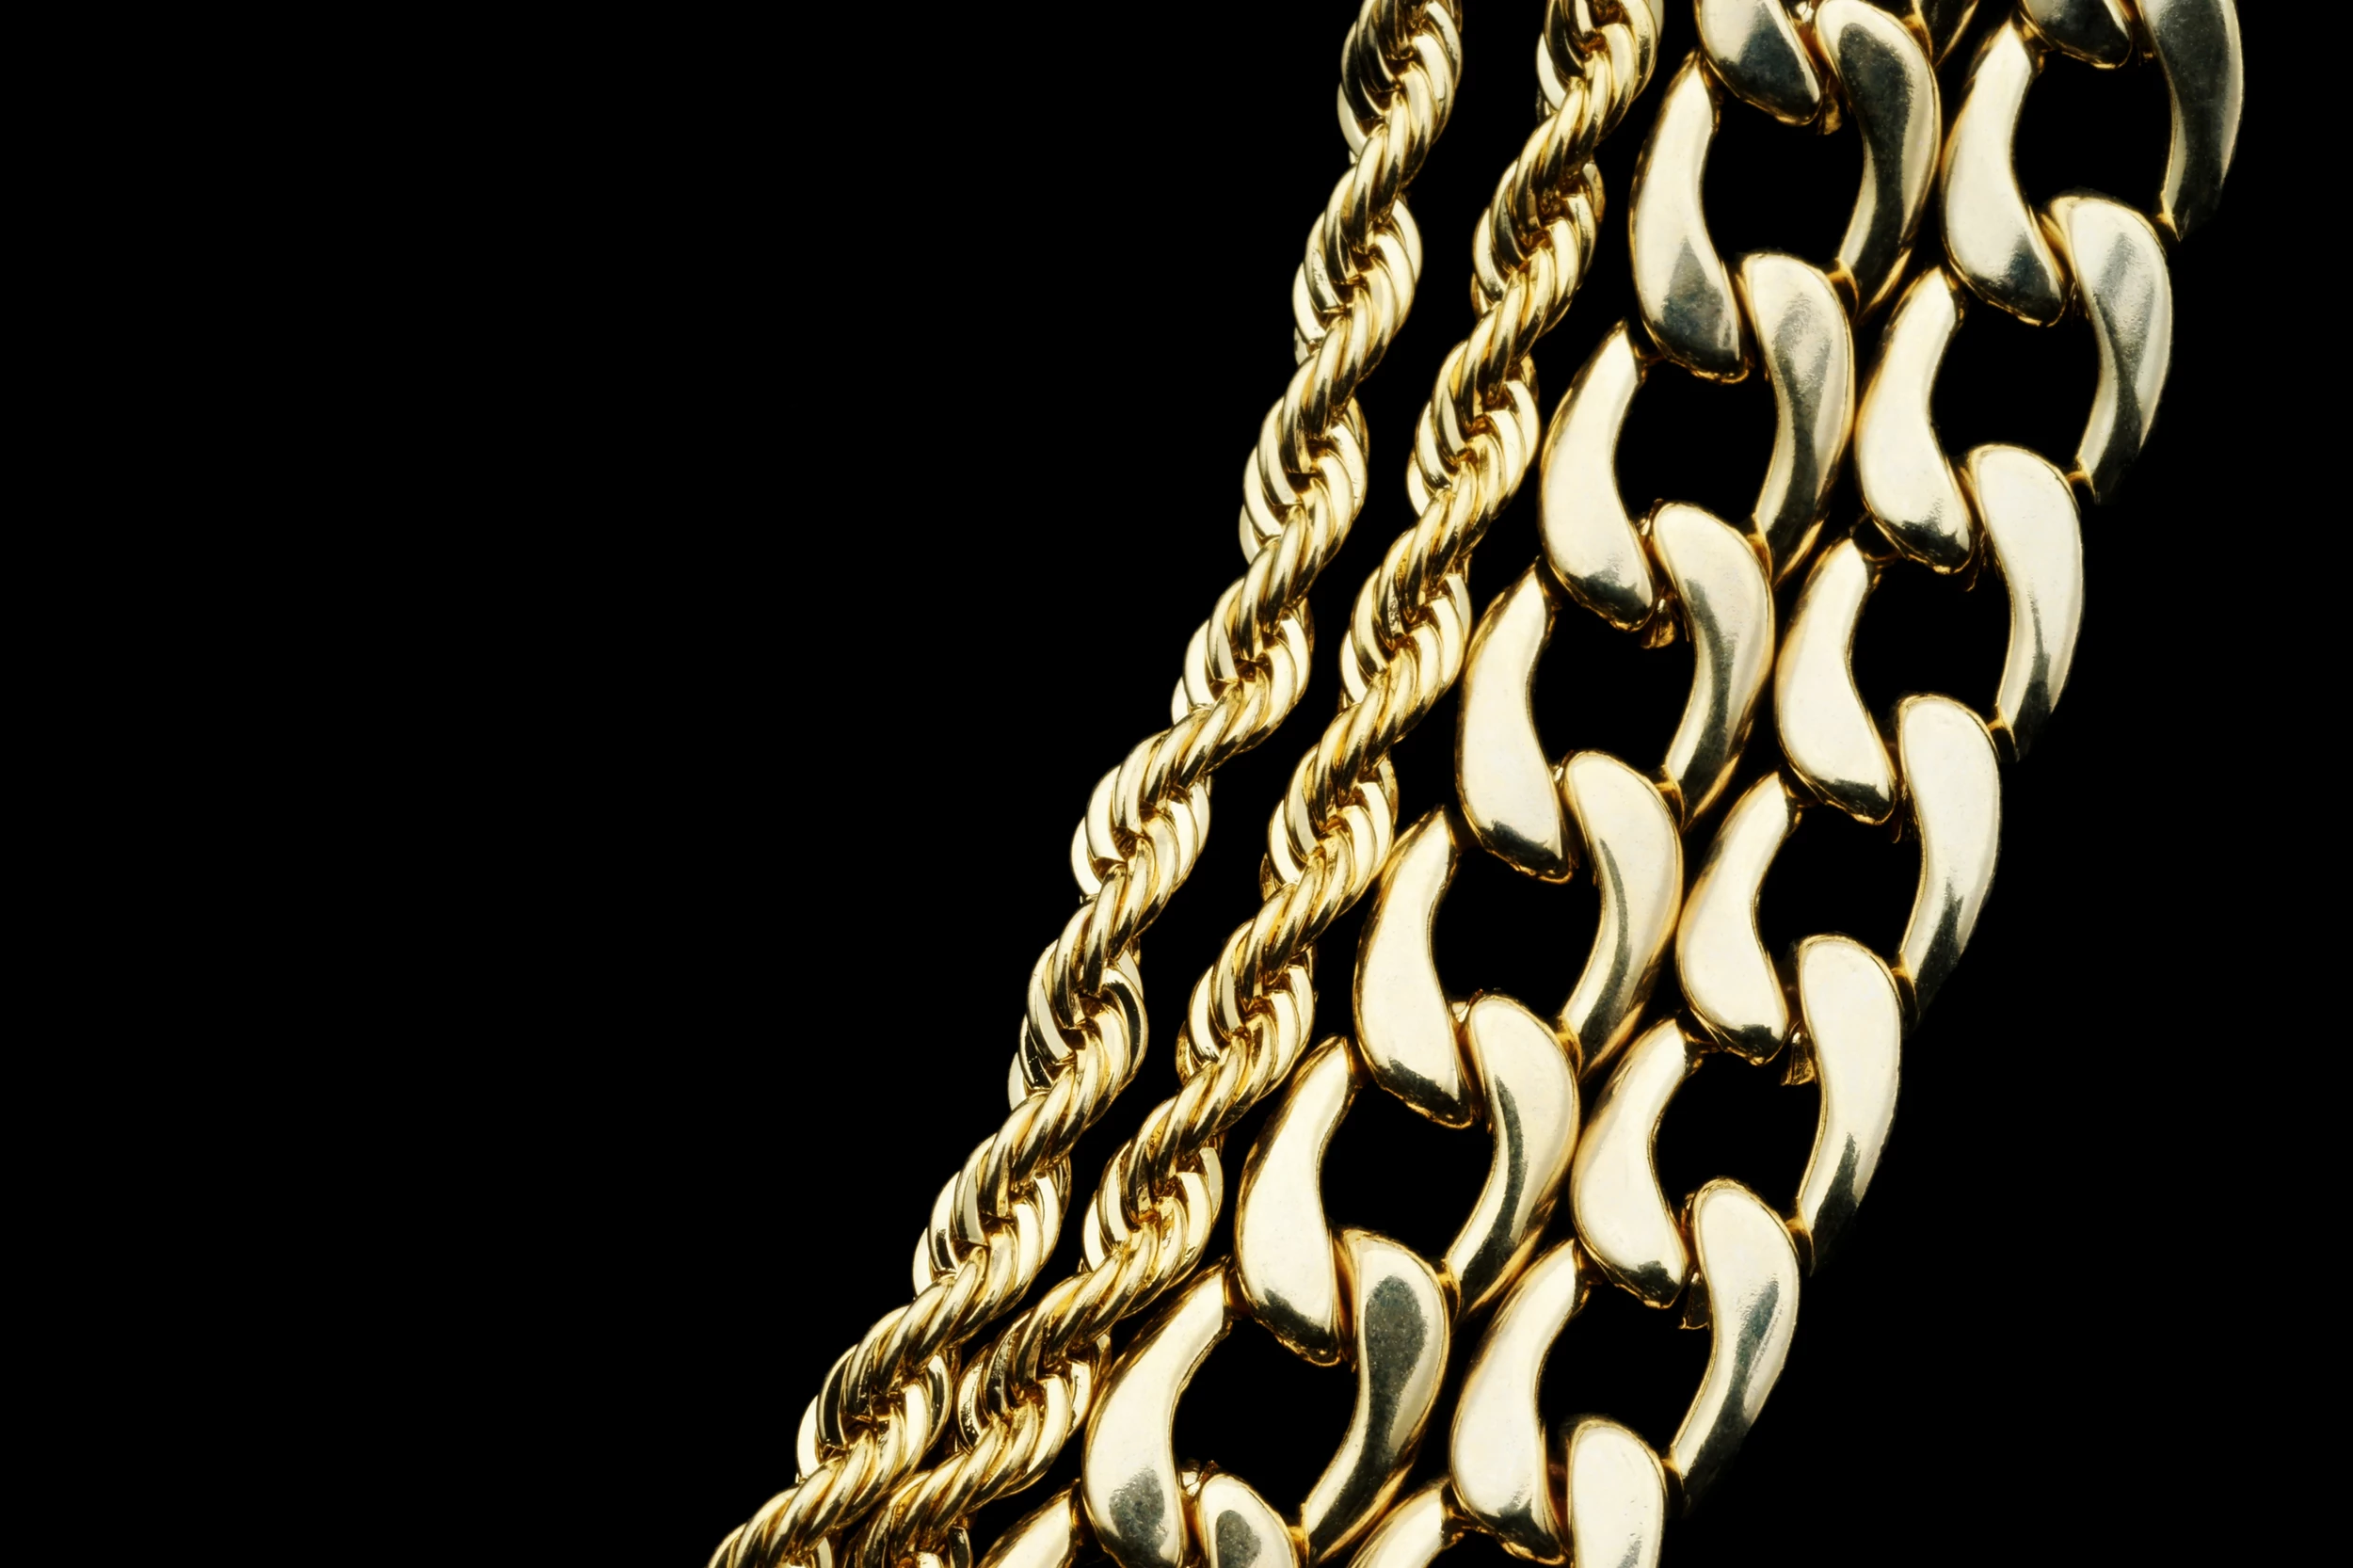 https://townsquare.media/site/812/files/2020/05/gold-chains.jpg